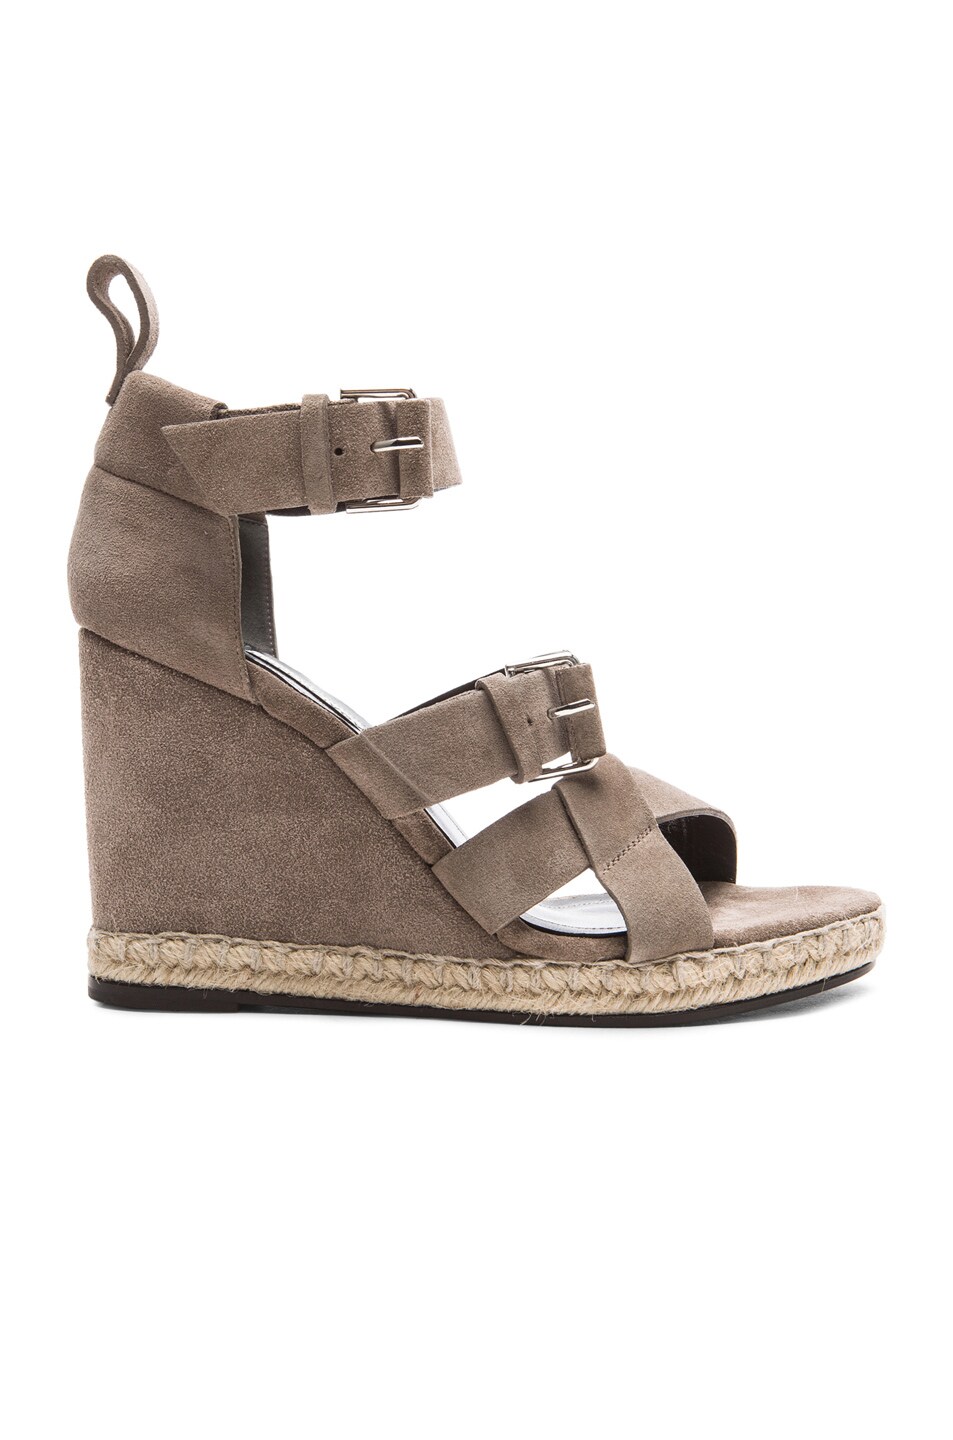 Image 1 of Balenciaga Wedge Espadrille Suede Sandals in Galet